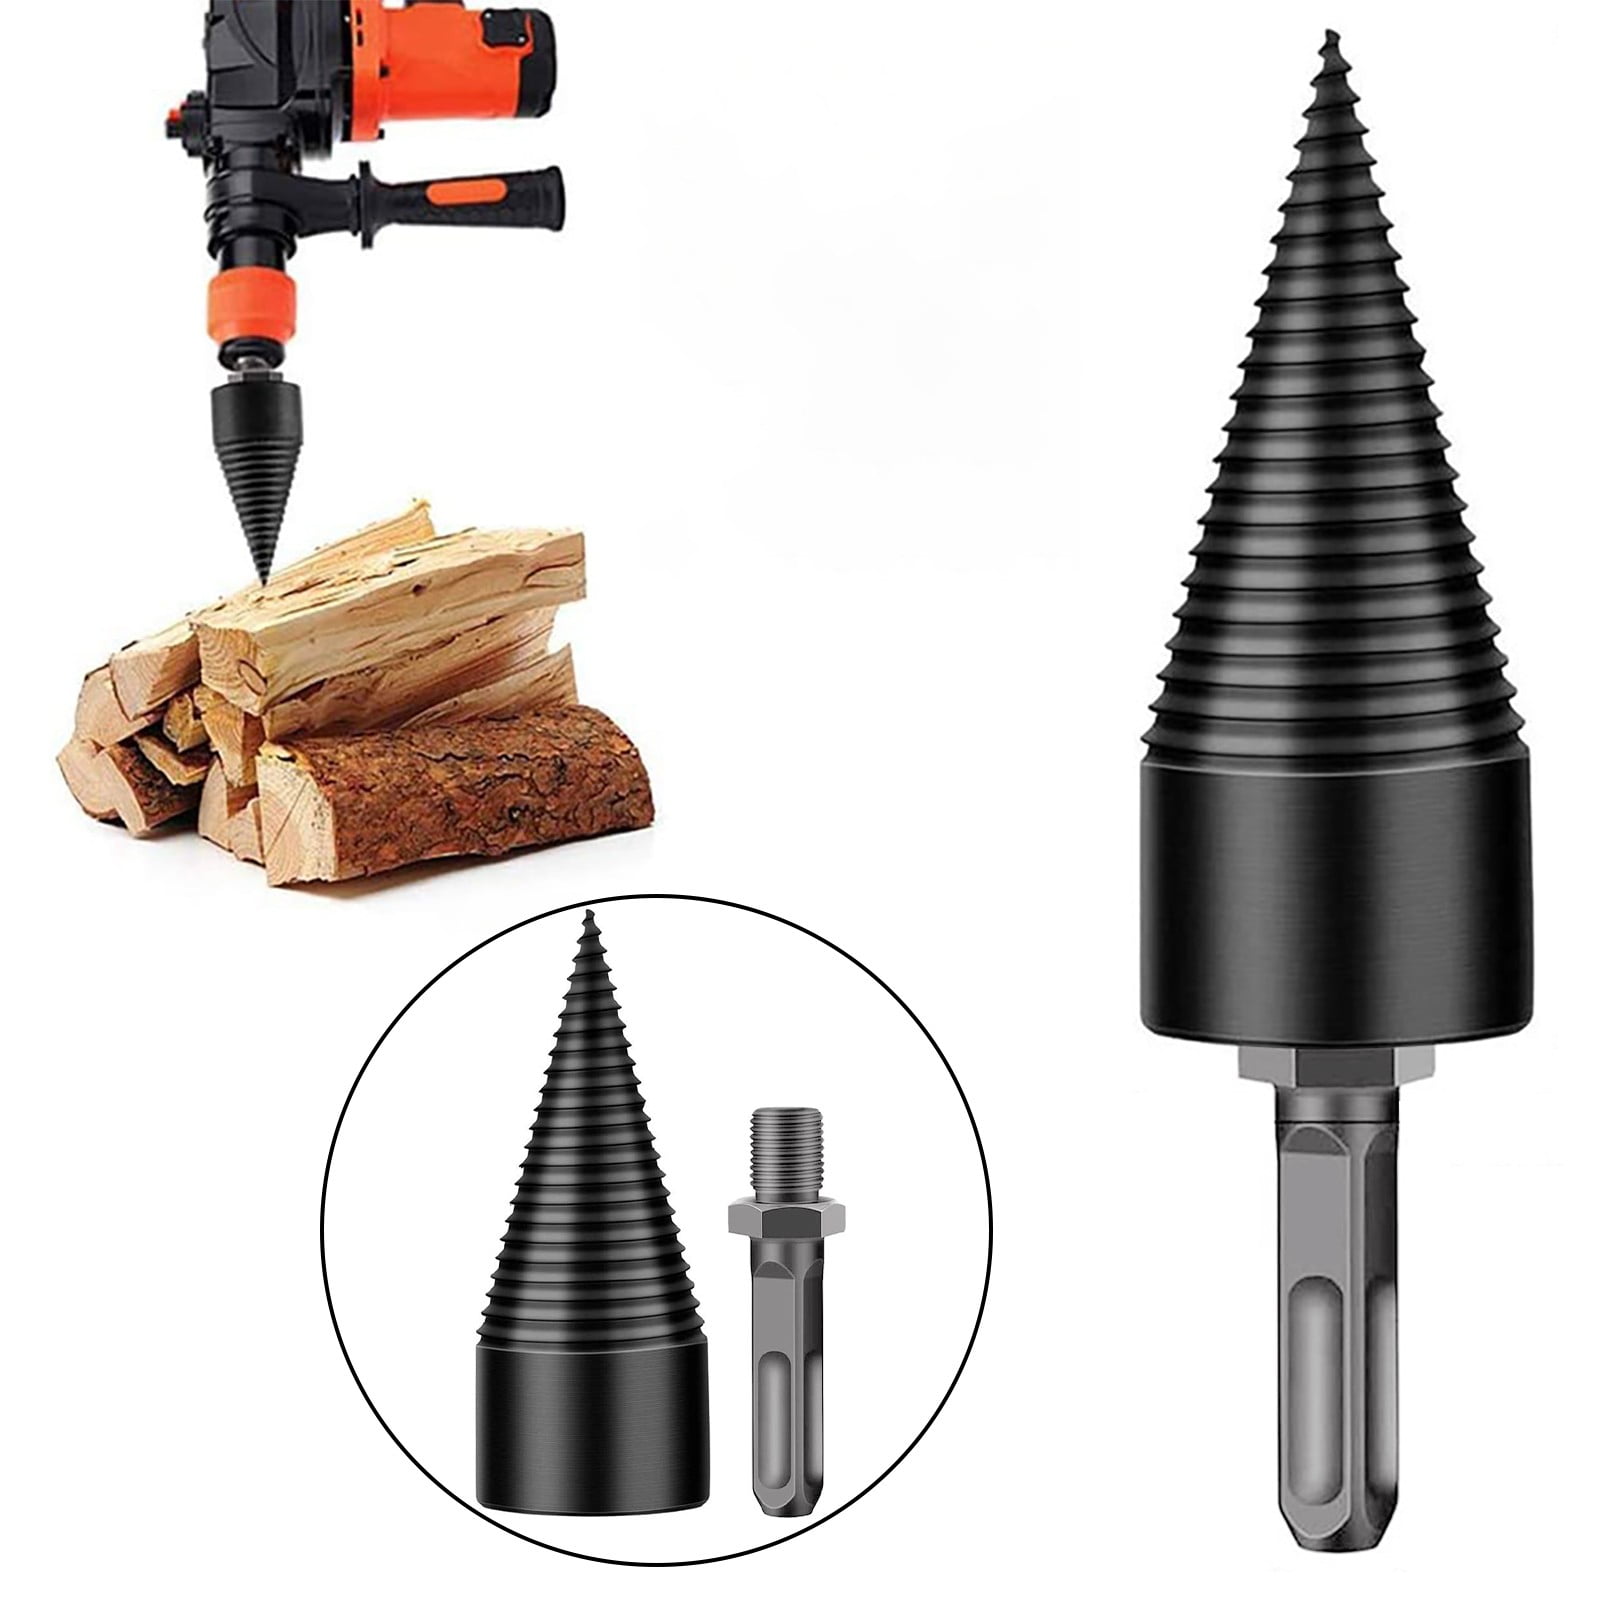 Hex Shank Log Breaker Reamer Woodworking Tools Wood Cut Tool for Electric Drill Machine,for Family,Camping or Farm XHXseller Firewood Drill Bit Wood Splitter